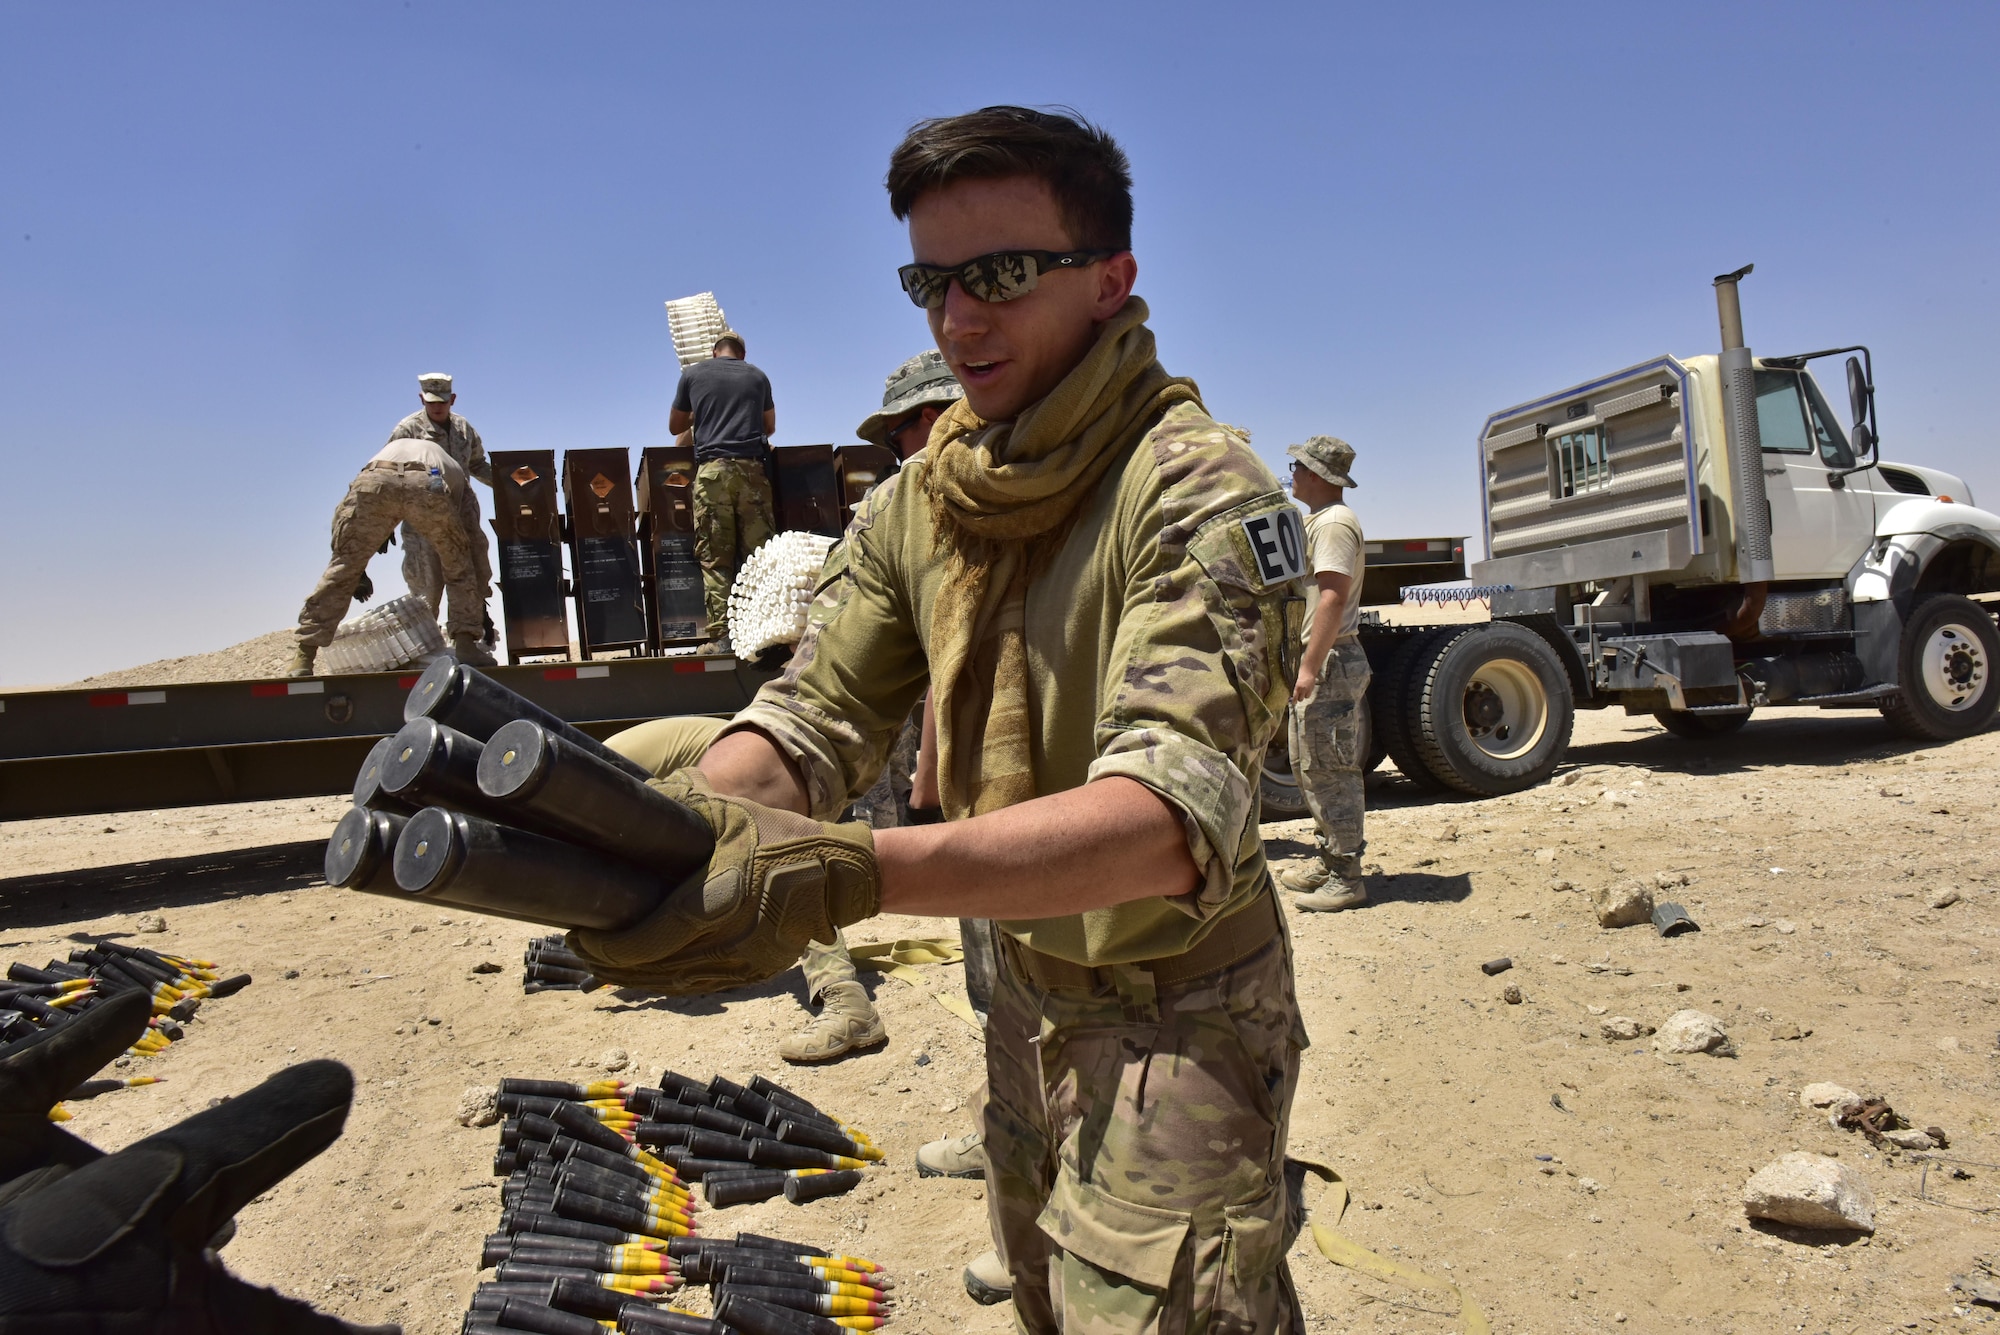 Senior Airman Kevin Oserguera, 407th Expeditionary Civil Engineer Squadron explosive ordnance disposal (EOD) technician, hands off munitions on a production line to unload a trailer during an explosive ordnance disposal (EOD) operation in Southwest Asia, June 6, 2017. Personnel from the 407th Expeditionary Civil Engineer Squadron EOD, U.S. Marine Corps Special Marine Air Ground Task Force EOD and Italian Air Force completed the task of disposing of more than 5,000 pieces of expired 30 mm rounds and aircraft decoy flares. EOD’s mission is to protect personnel, resources, and the environment from hazardous explosive ordnance, improvised explosive devices and weapons of mass destruction, which may include; incendiary, chemical, biological, radiological, and nuclear hazards.  They specialize in tools, techniques and personal protective equipment to detect or identify, monitor, evaluate, interrogate, mitigate, render safe, recover, and disposal operations on ordnance or devices delivered, placed, or made dangerous by any circumstances. (U.S. Air Force photo by Senior Airman Ramon A. Adelan)